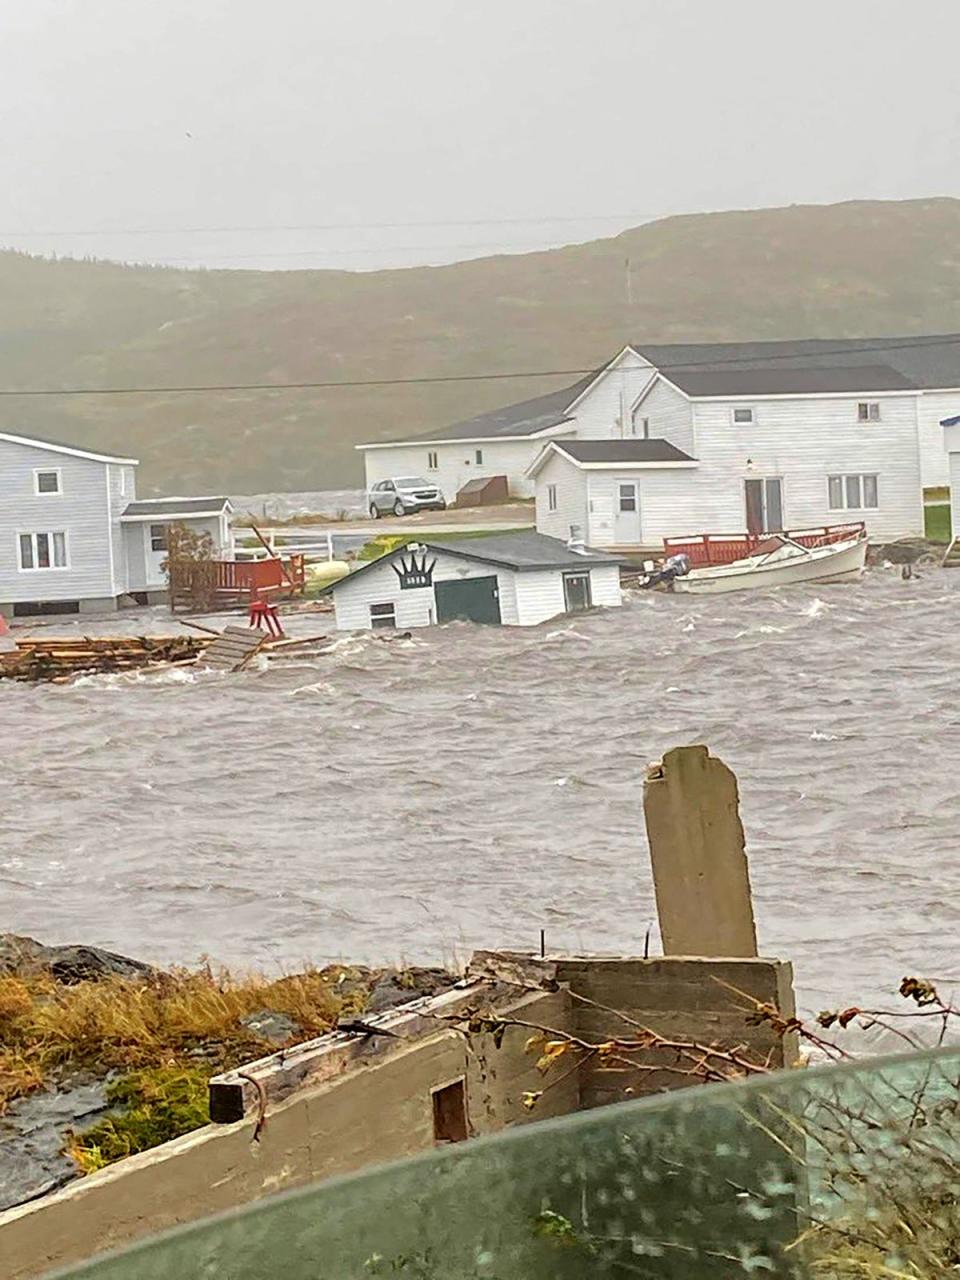 Damage caused by post-tropical storm Fiona on the Burnt Islands, in the Newfoundland and Labrador Province of Canada (Michael King/AFP via Getty Image)